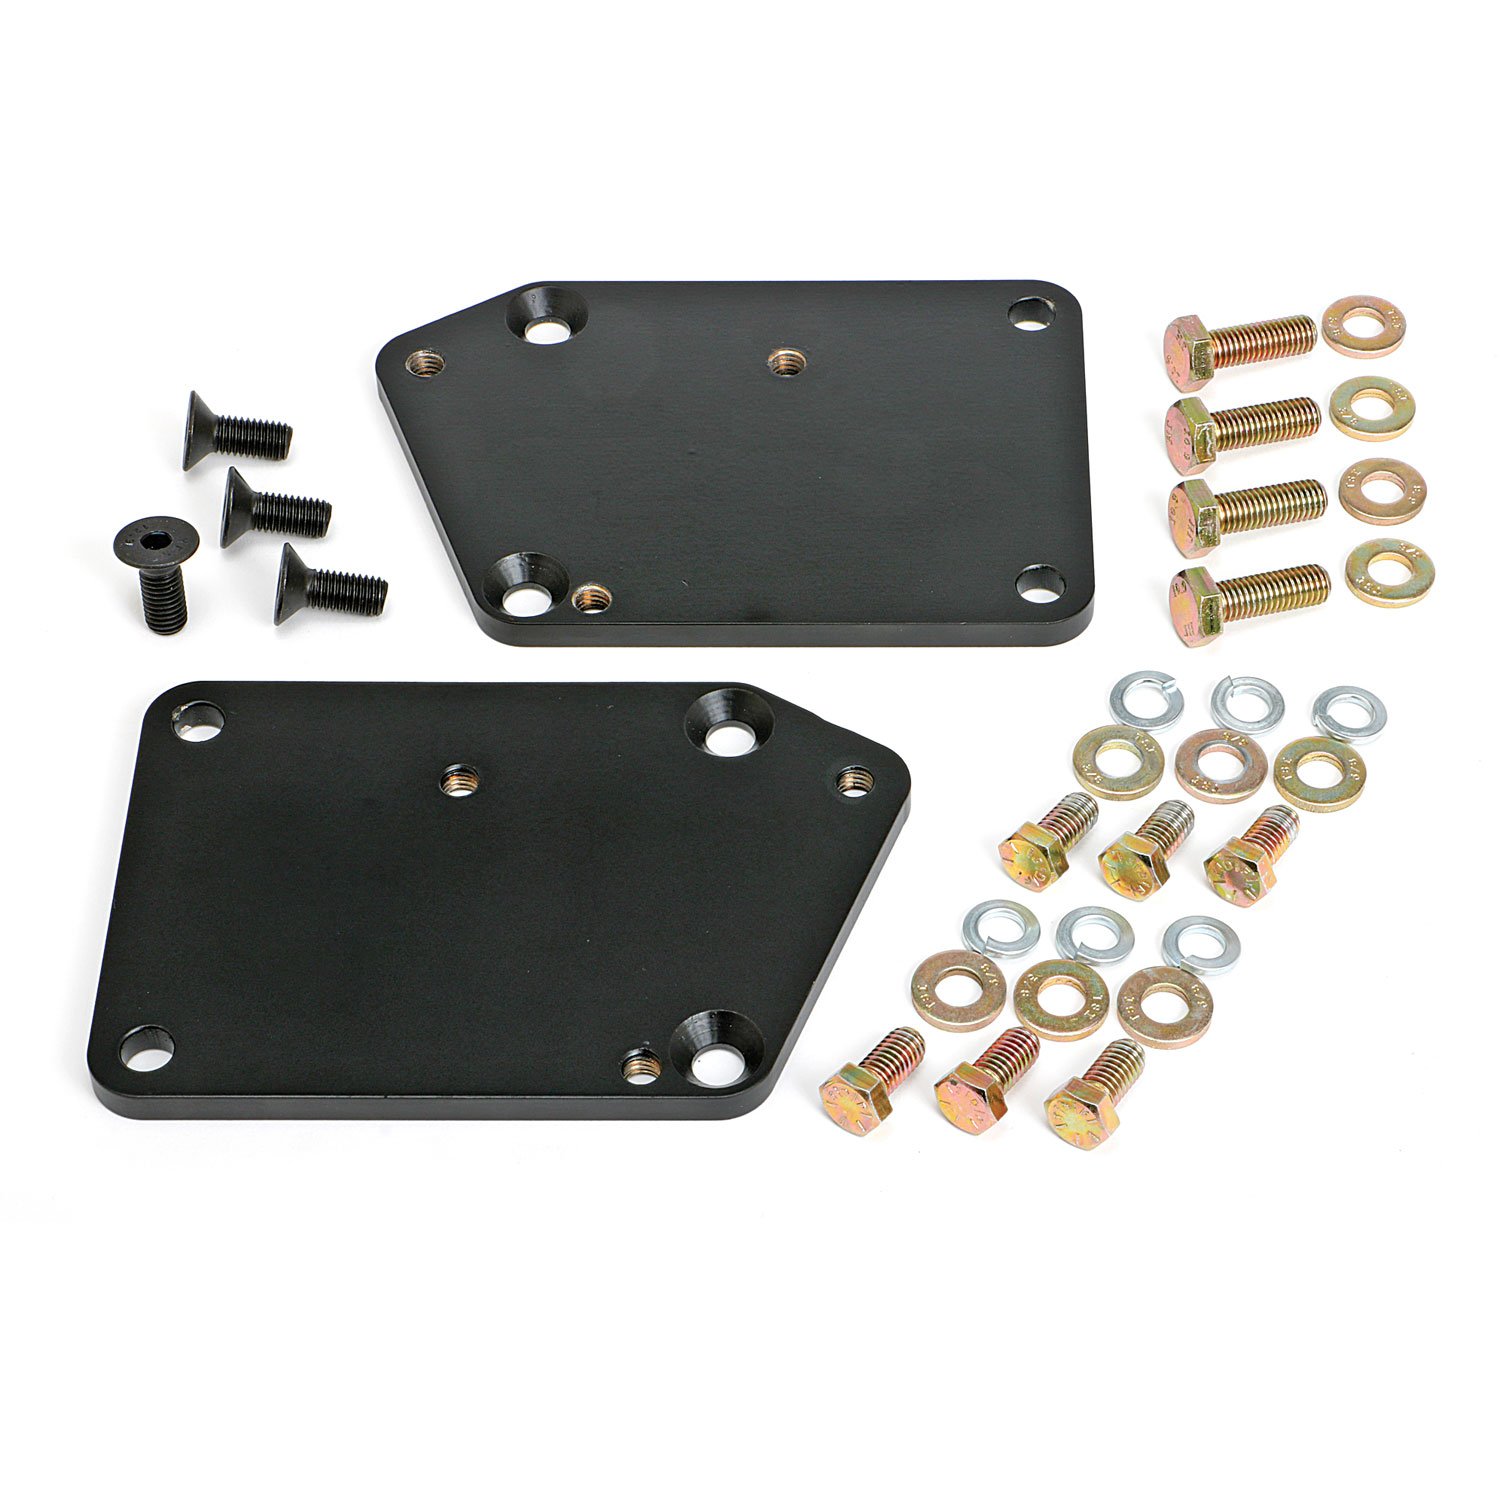 Engine Swap Conversion Plates LT to Small Block Chevy Car